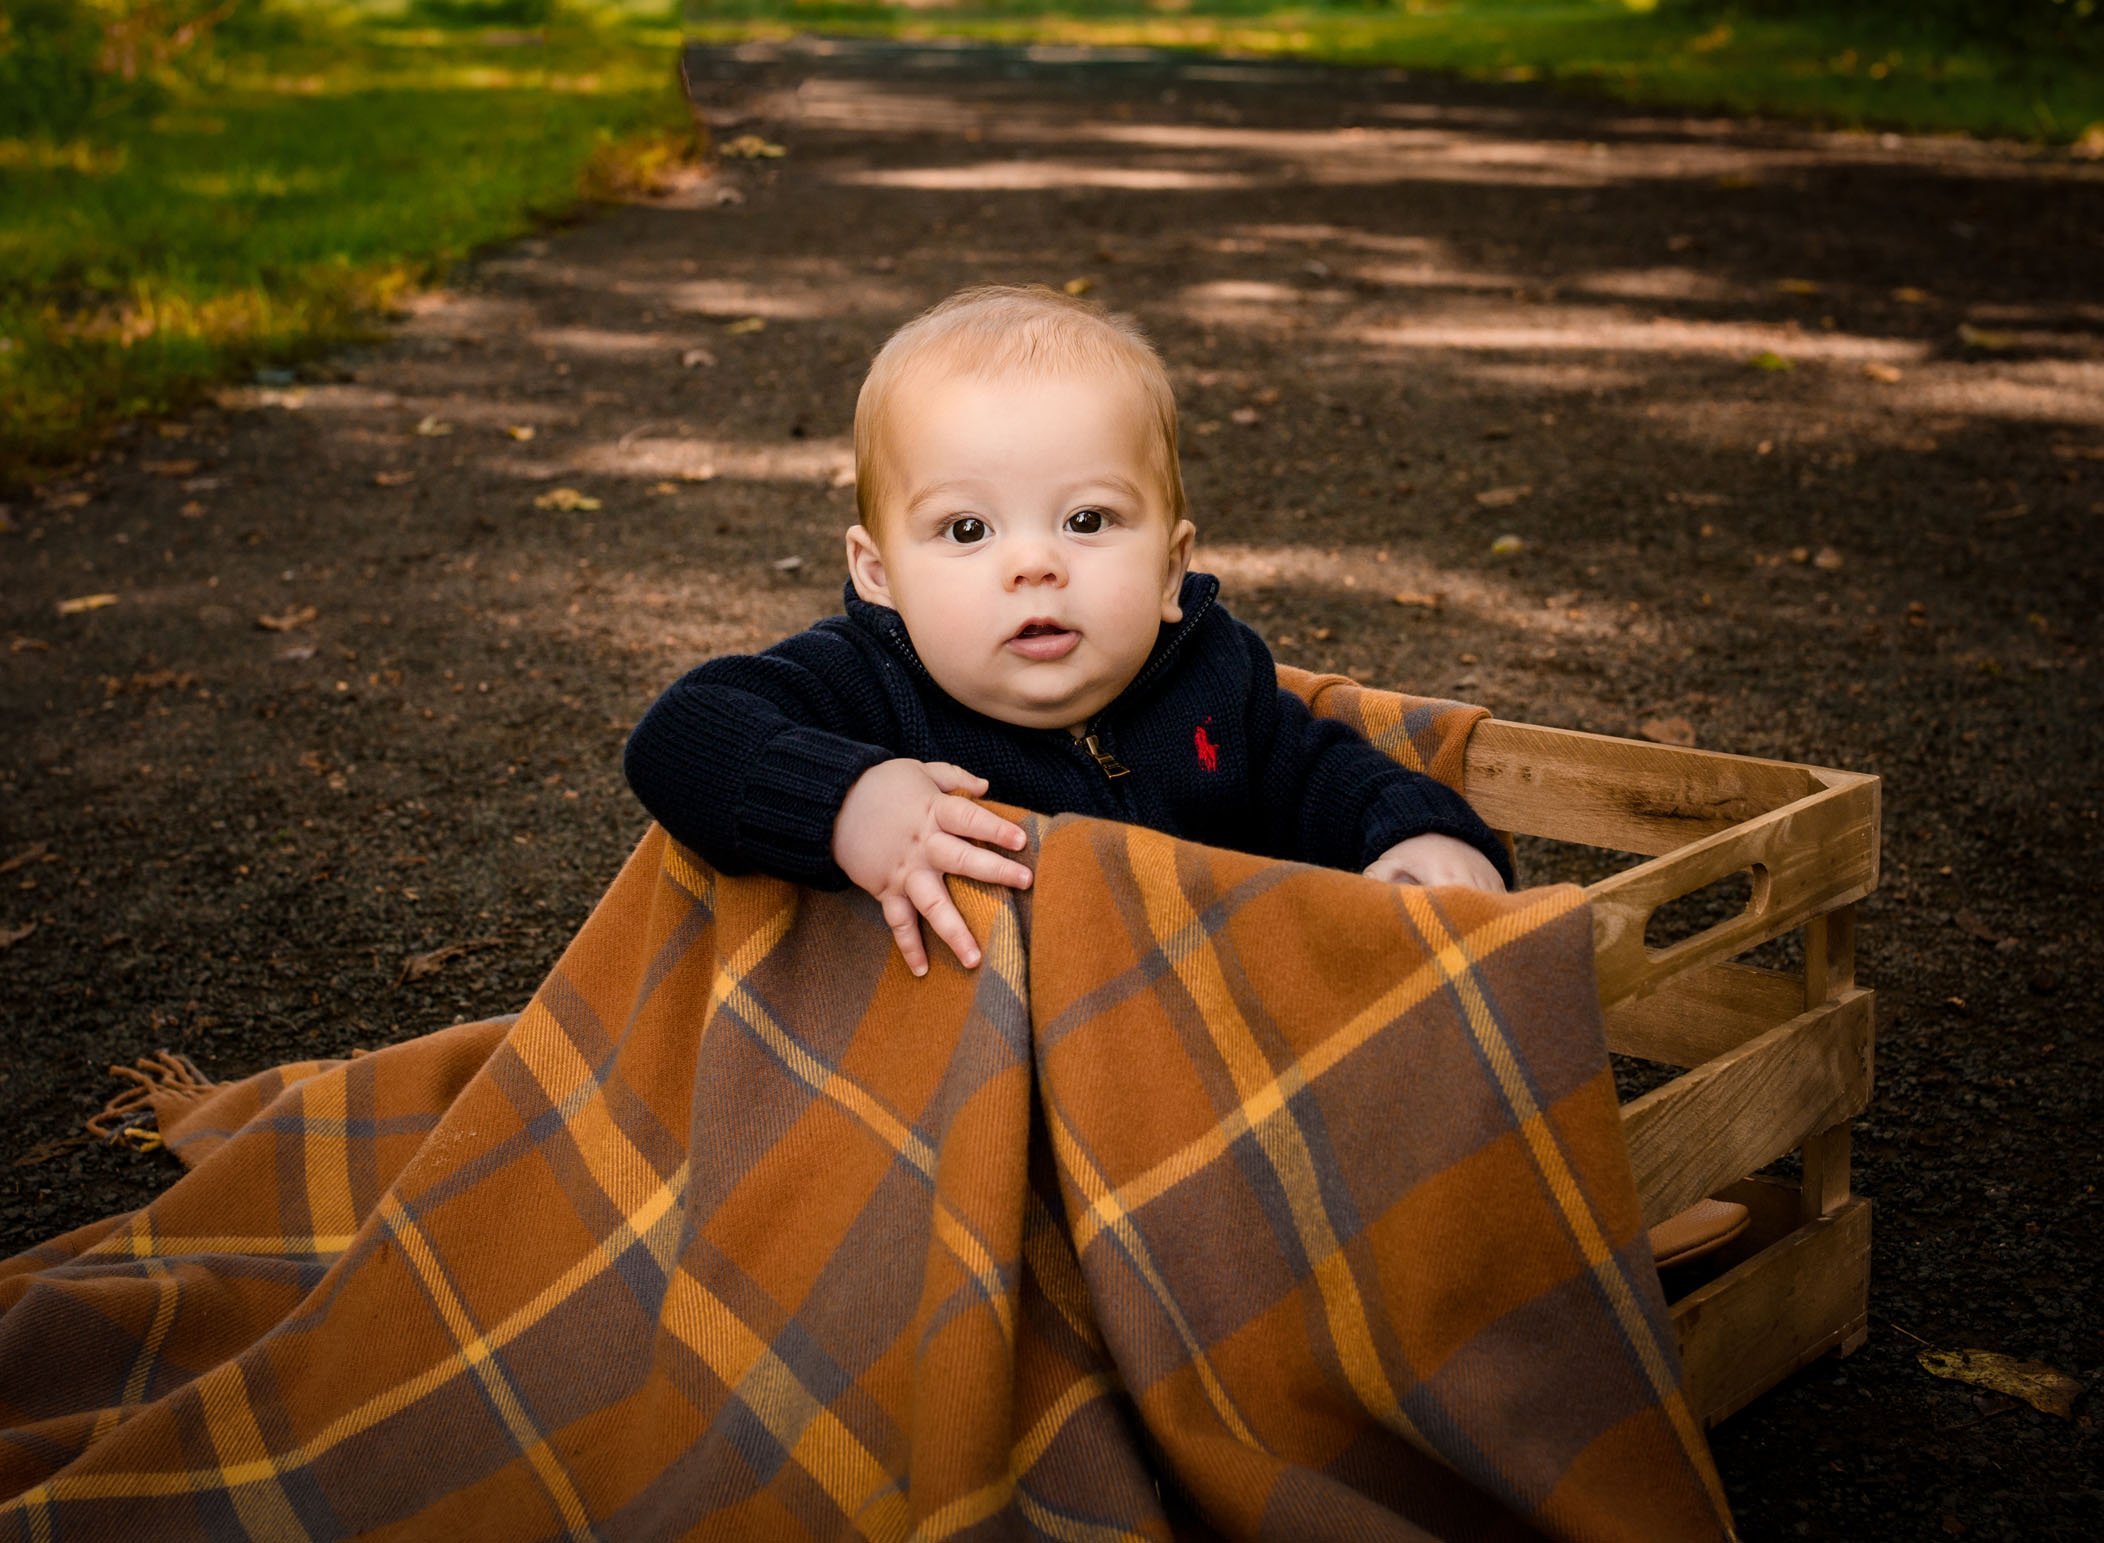 6 month old baby boy sitting in a crate with a fall blanket outside on a path